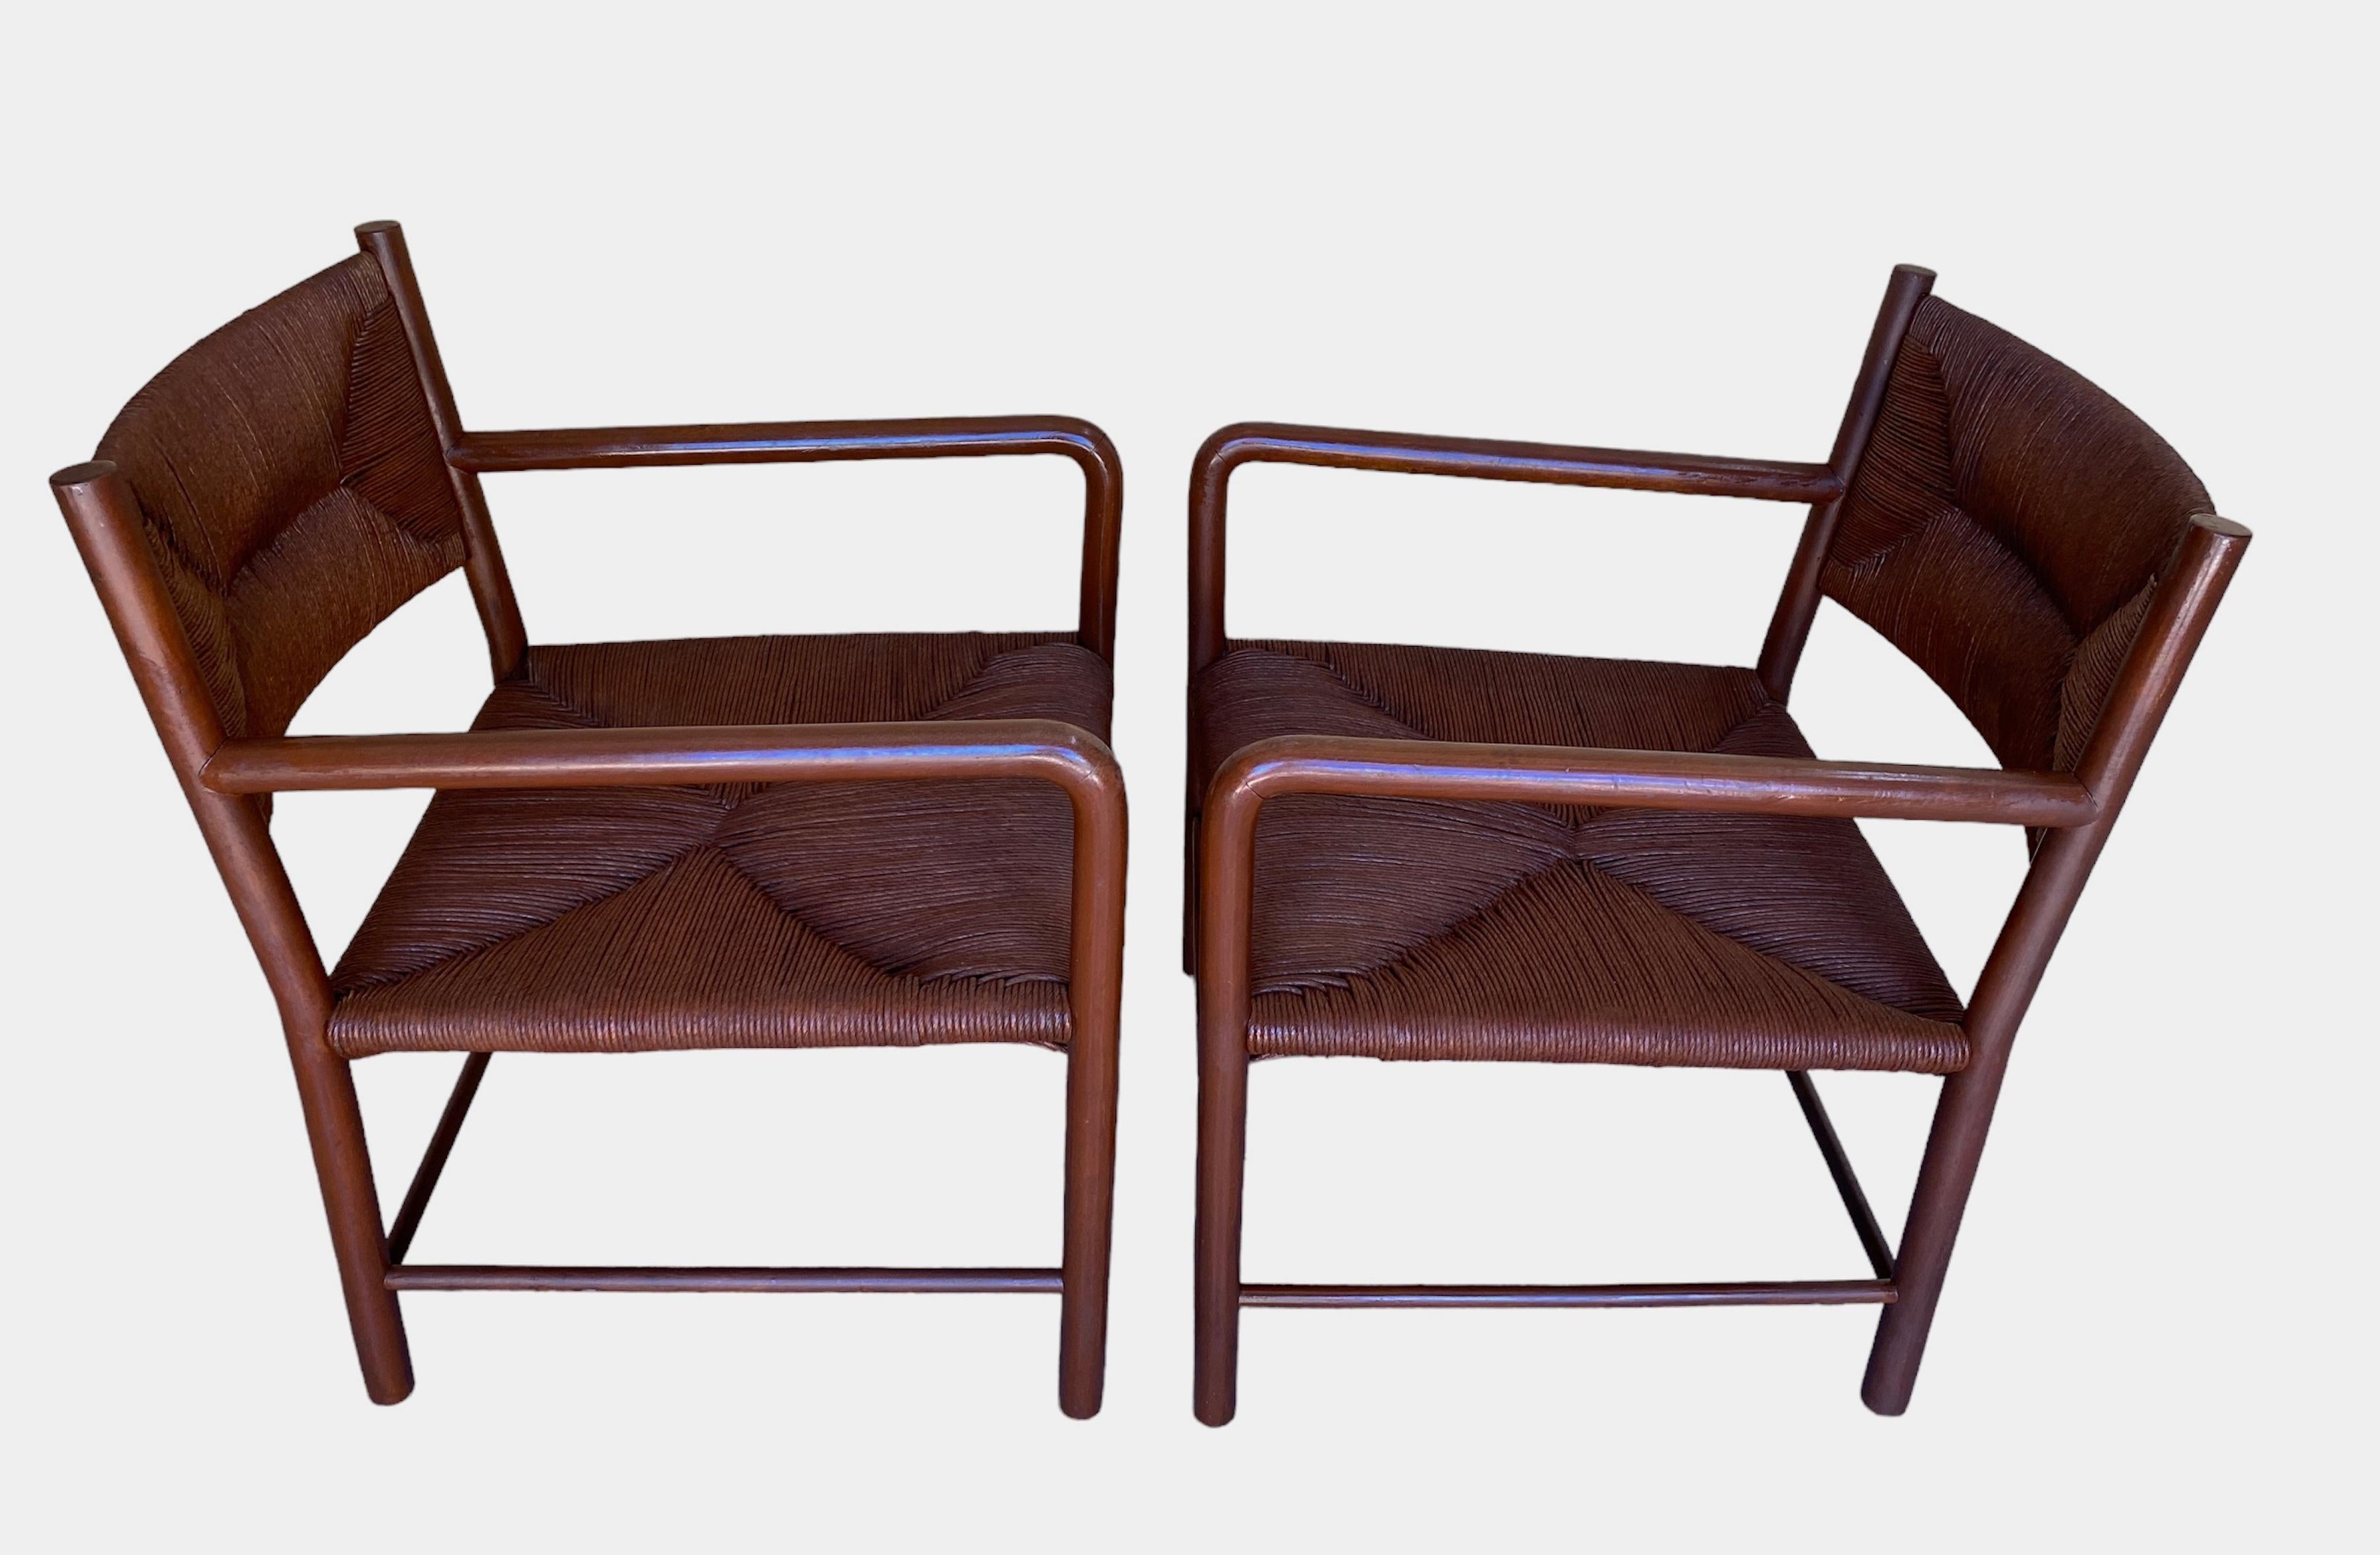 Pair of Emanuele Rambaldi Modernist Brown Lacquered Armchairs, Italy 1940s For Sale 6